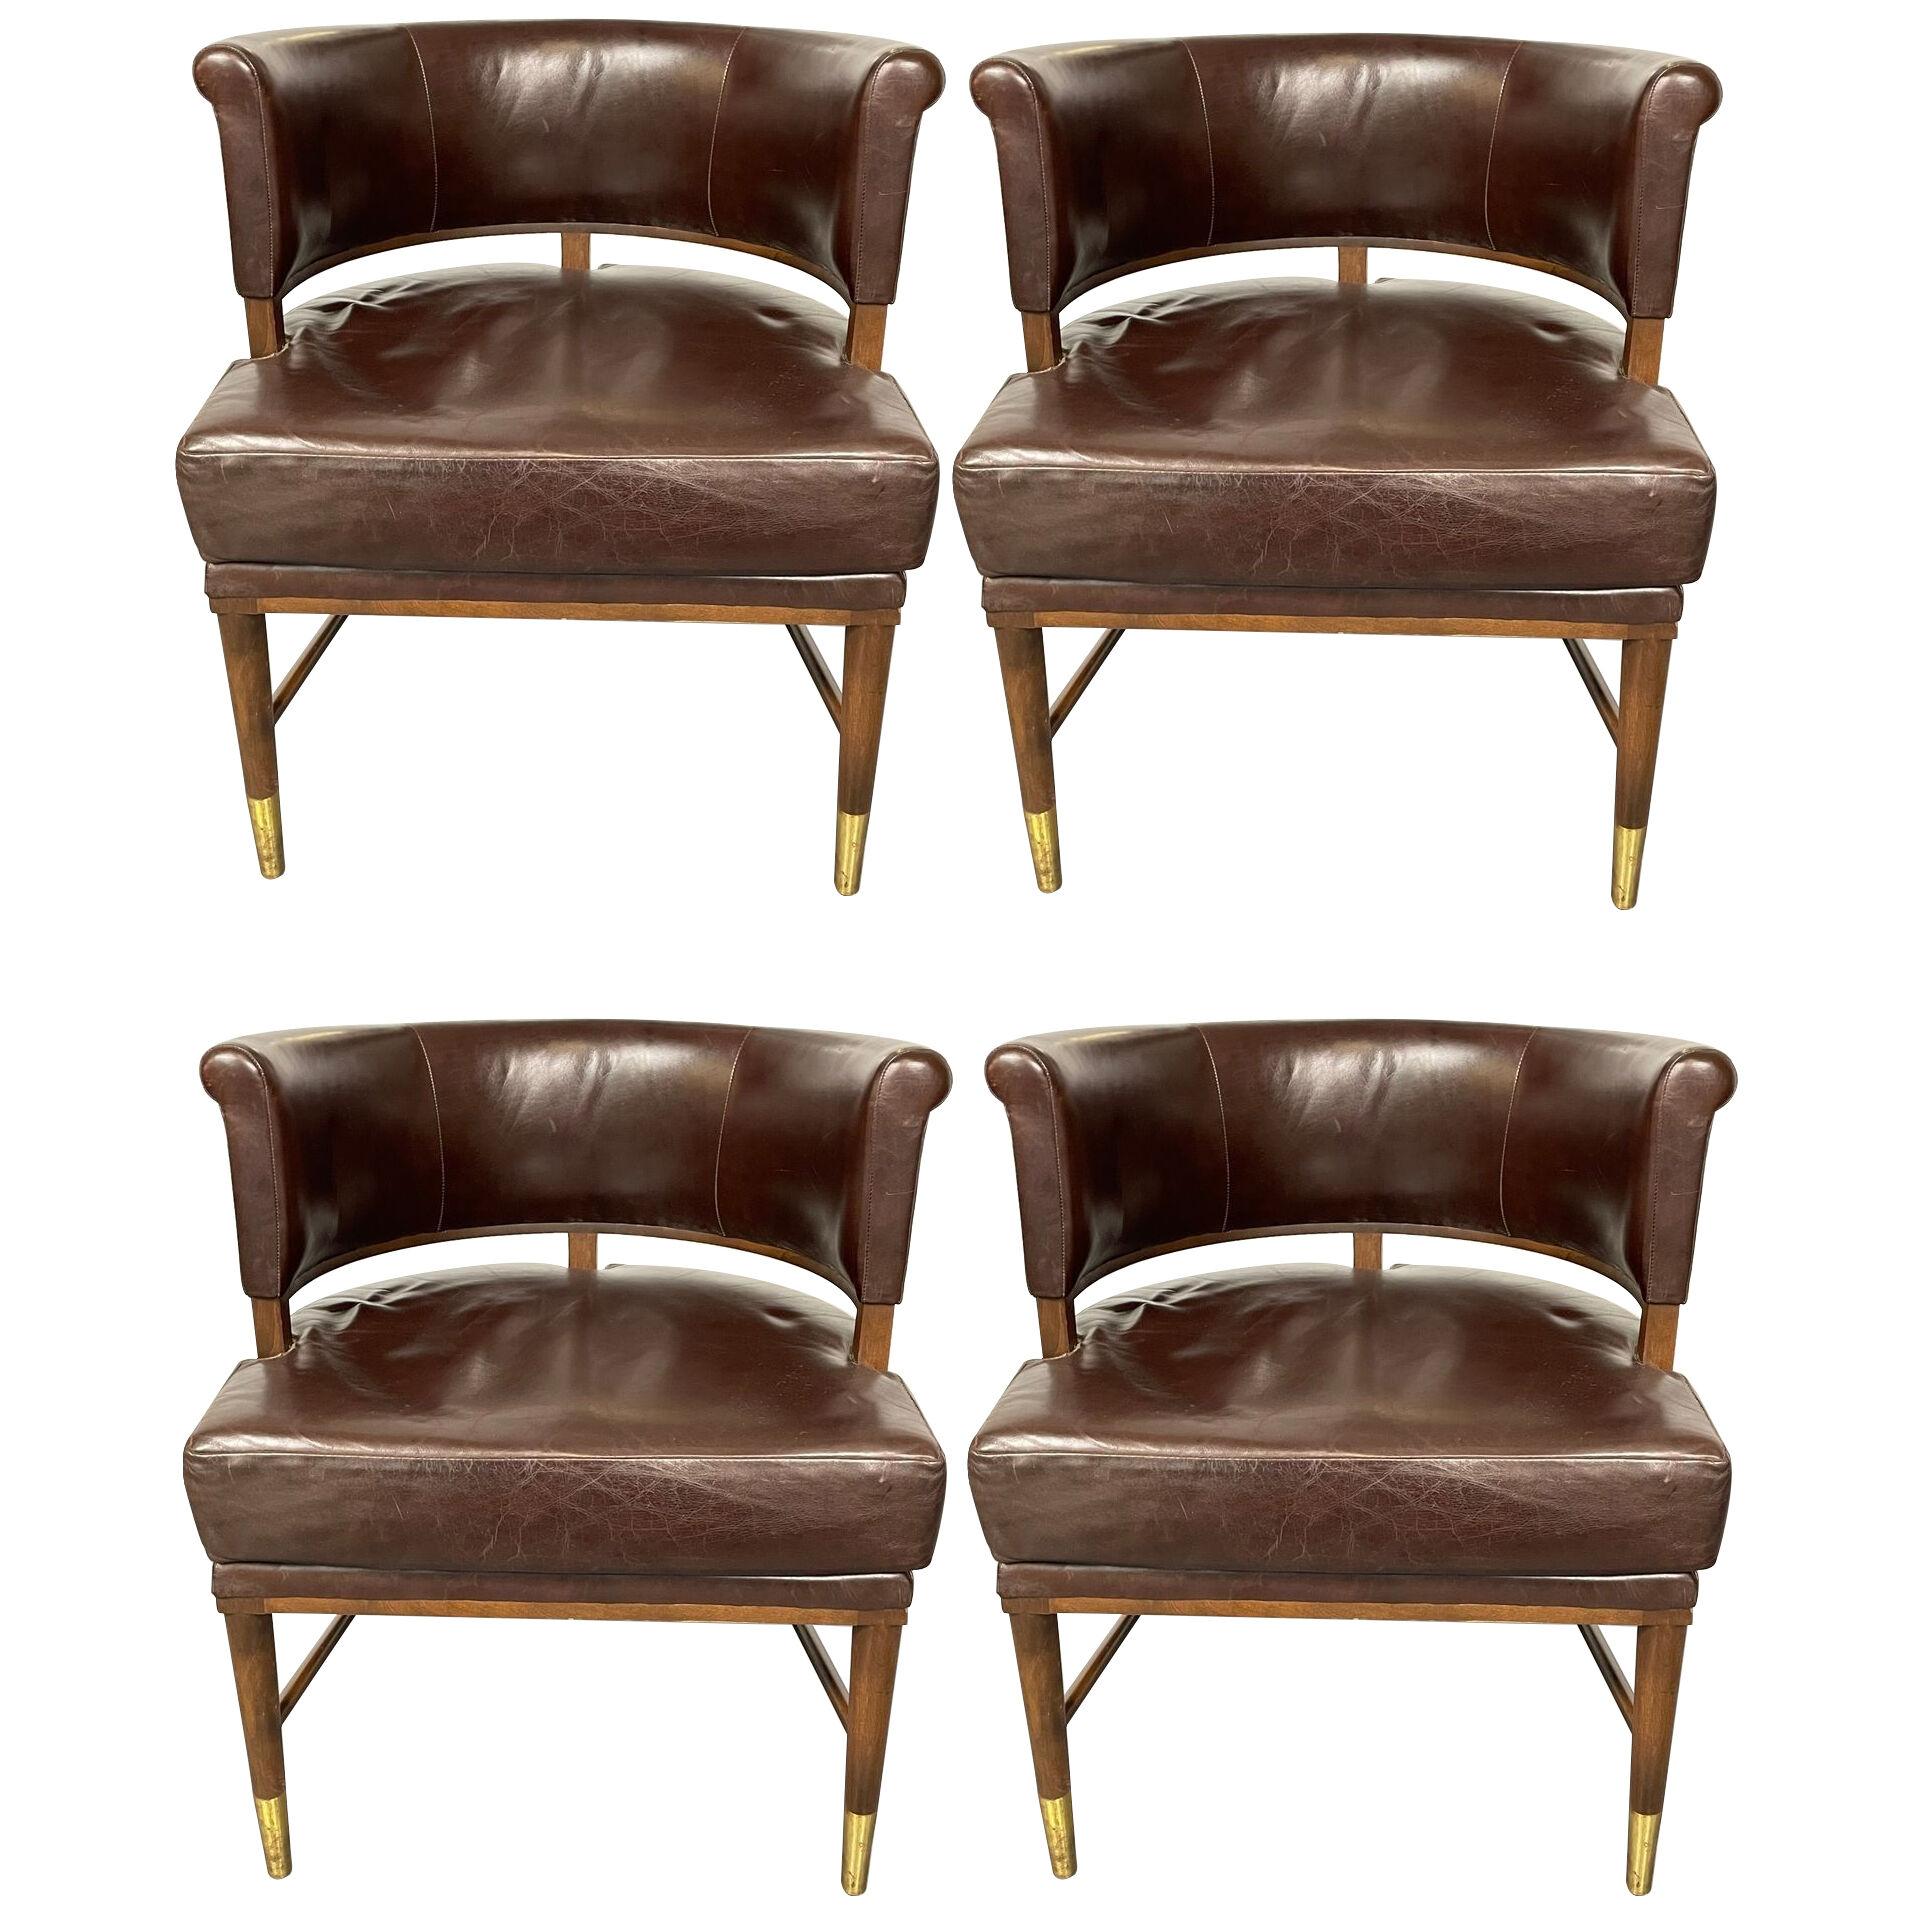 Set of Four Mid-Century Modern Leather Chairs, Manner Gio Ponti